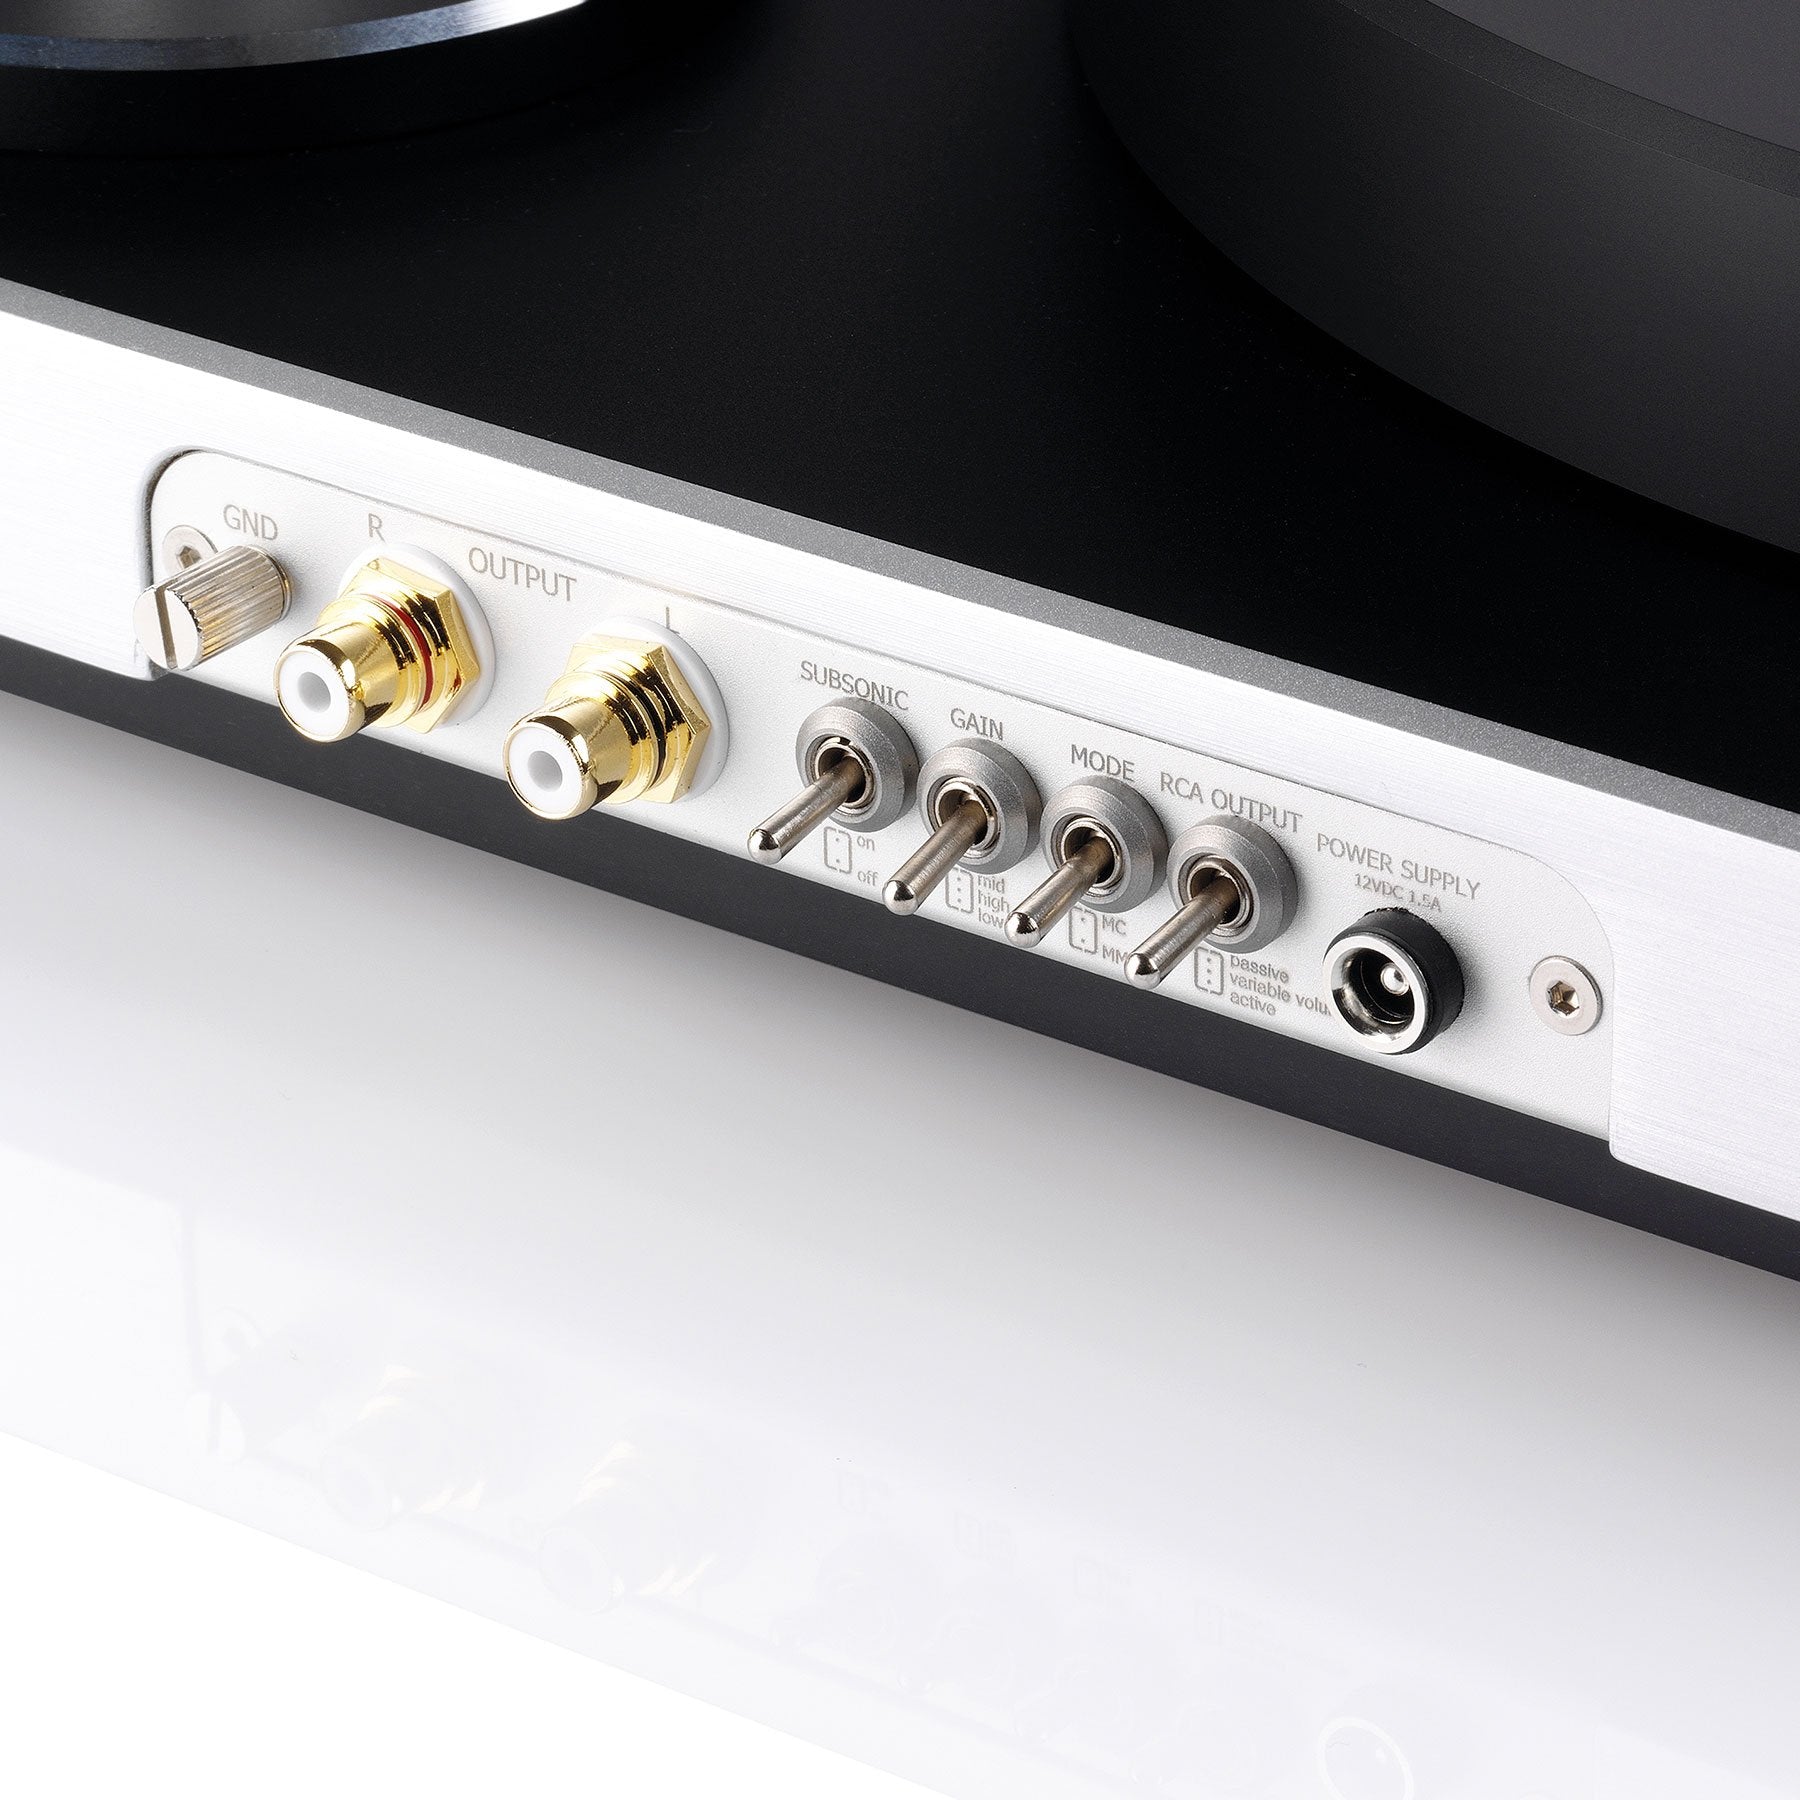 Clearaudio: Concept Active Turntable - Black